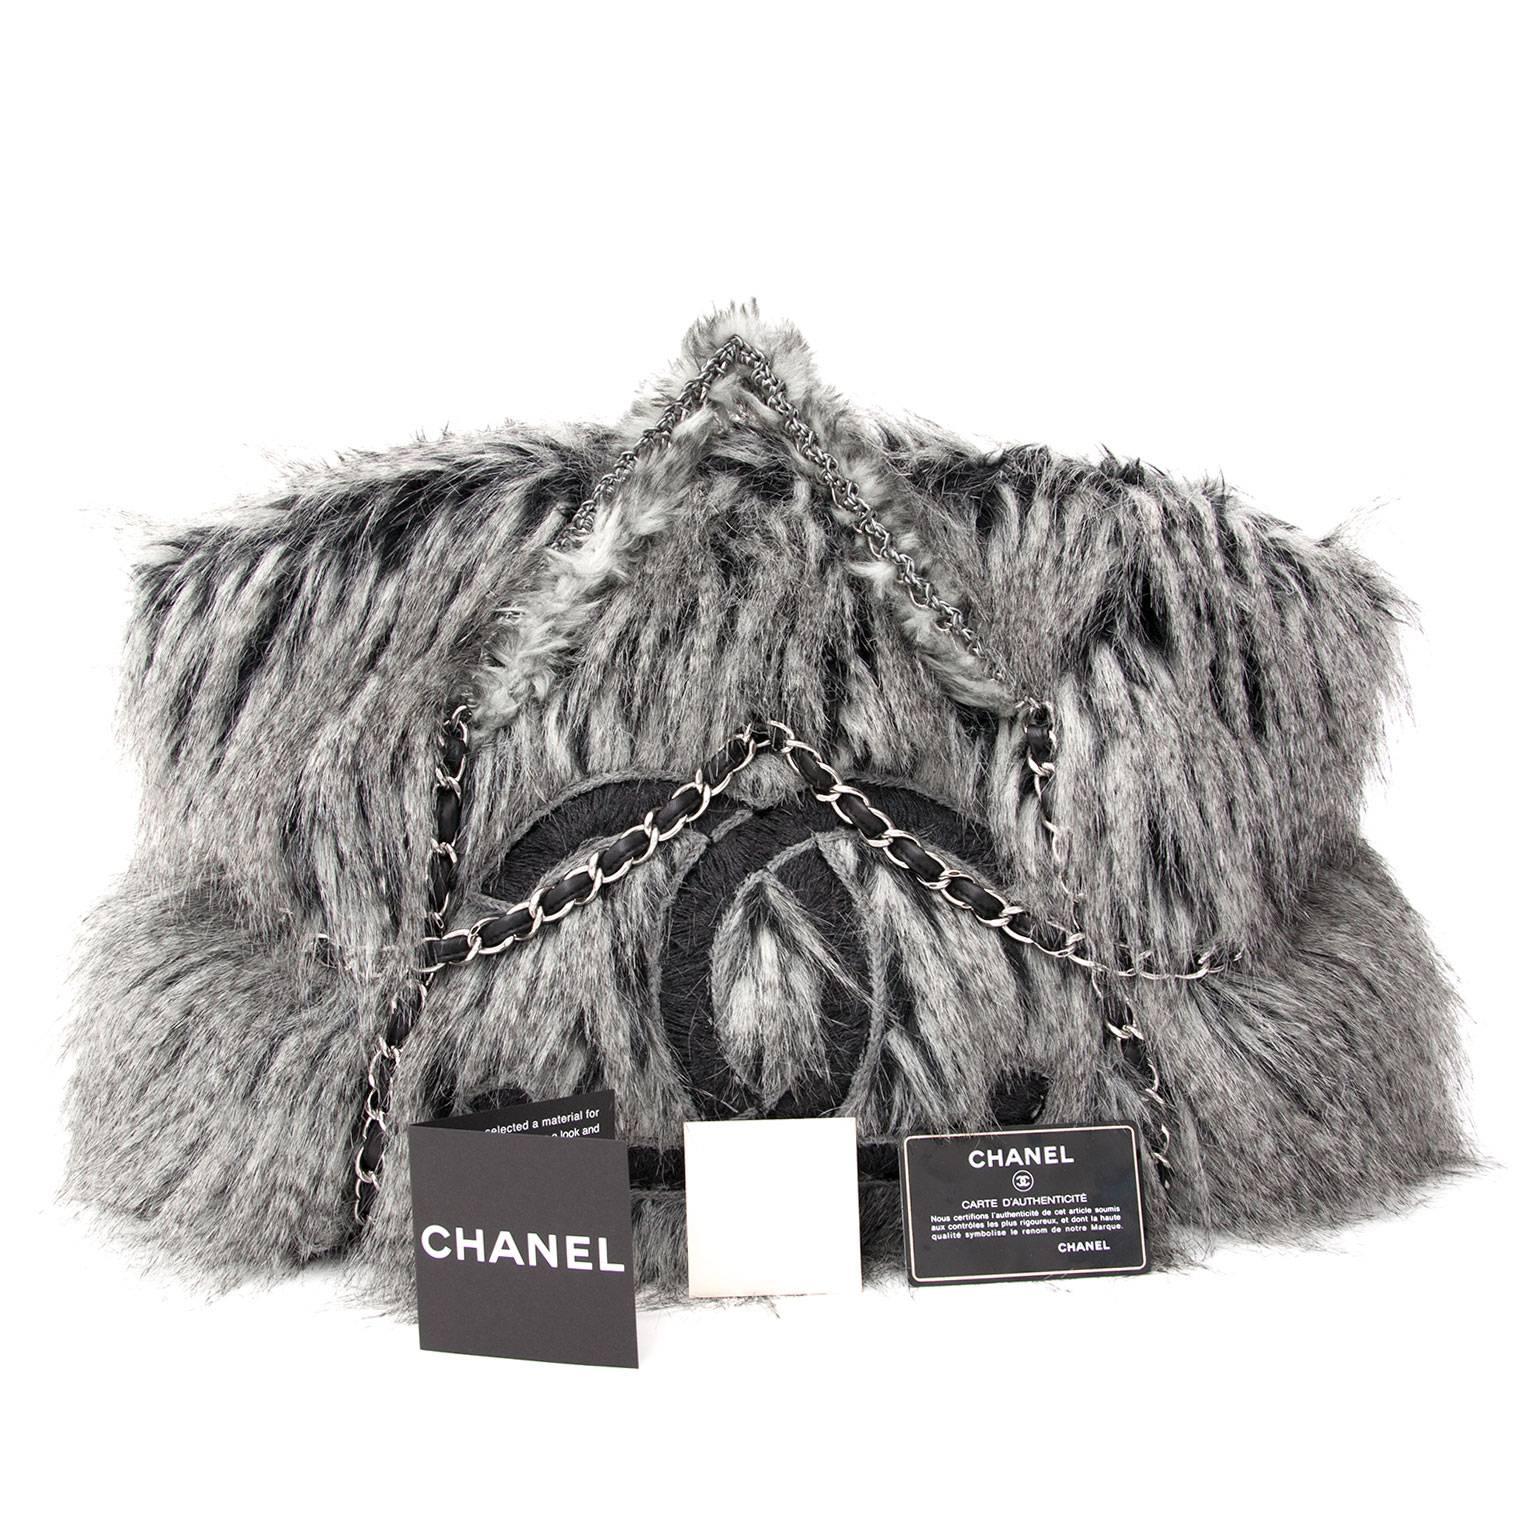 Limited Chanel Grey Faux Fur Arctic Fantasy Fur Large Tote Bag.
This unique tote bag runway 2010 is extremely hard to find and features a grey faux fur with a silver chain and leather detailing throughout. The Perfect bag for the die-hard Chanel